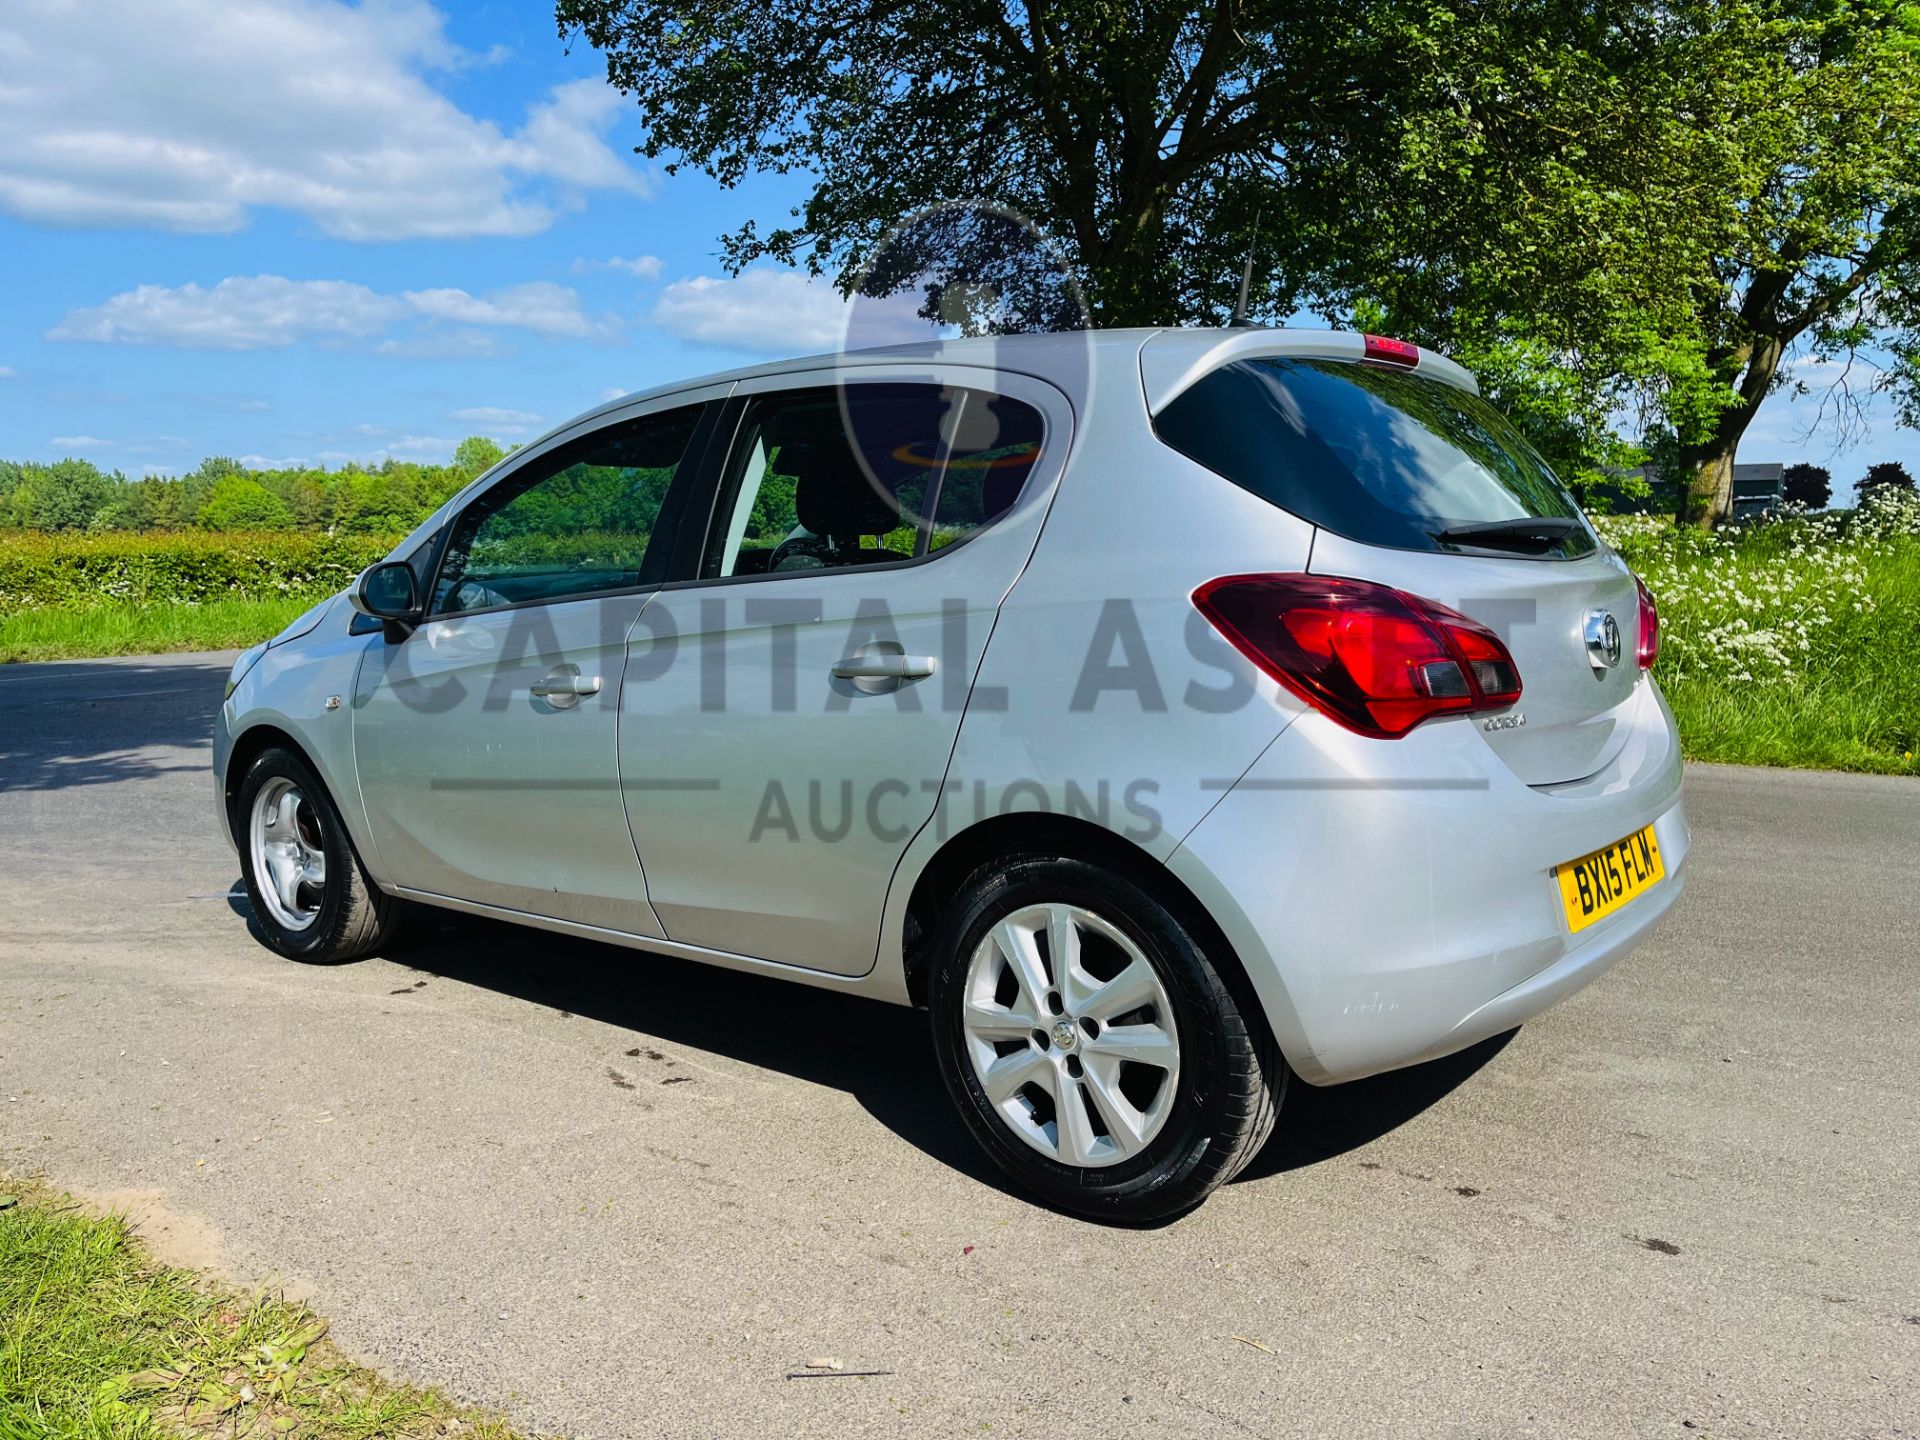 (On Sale) VAUXHALL CORSA 1.5CDTI "DESIGN" 5 DOOR (15 REG ) 1 OWNER - ONLY 90K MILES FSH - AIR CON - Image 9 of 22